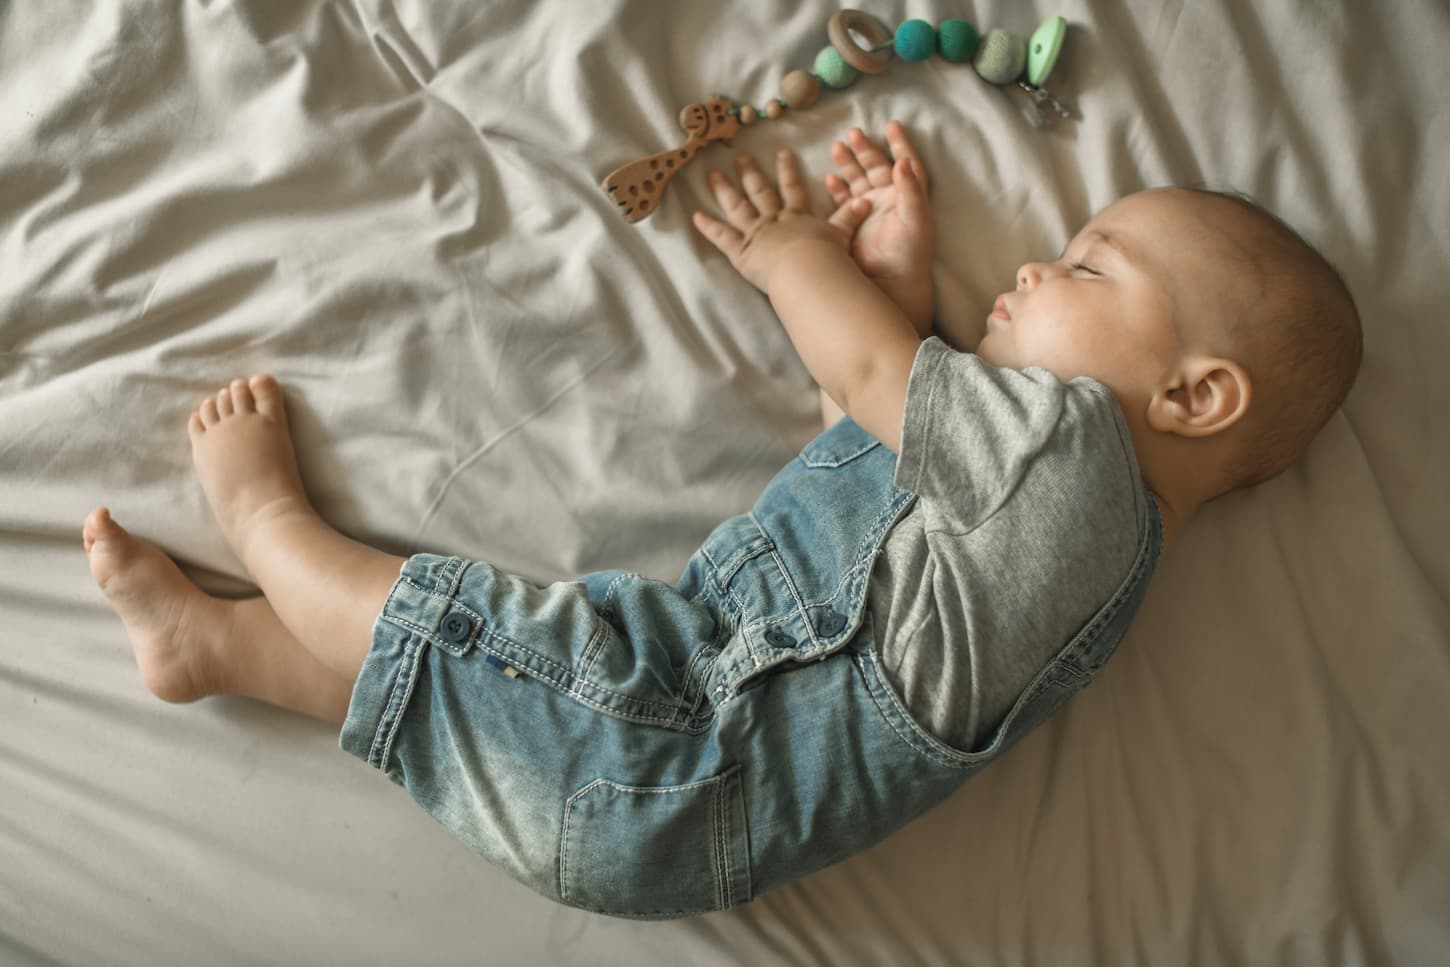 An image of a 7-month-old baby sleeping with a juniper toy on the bed.